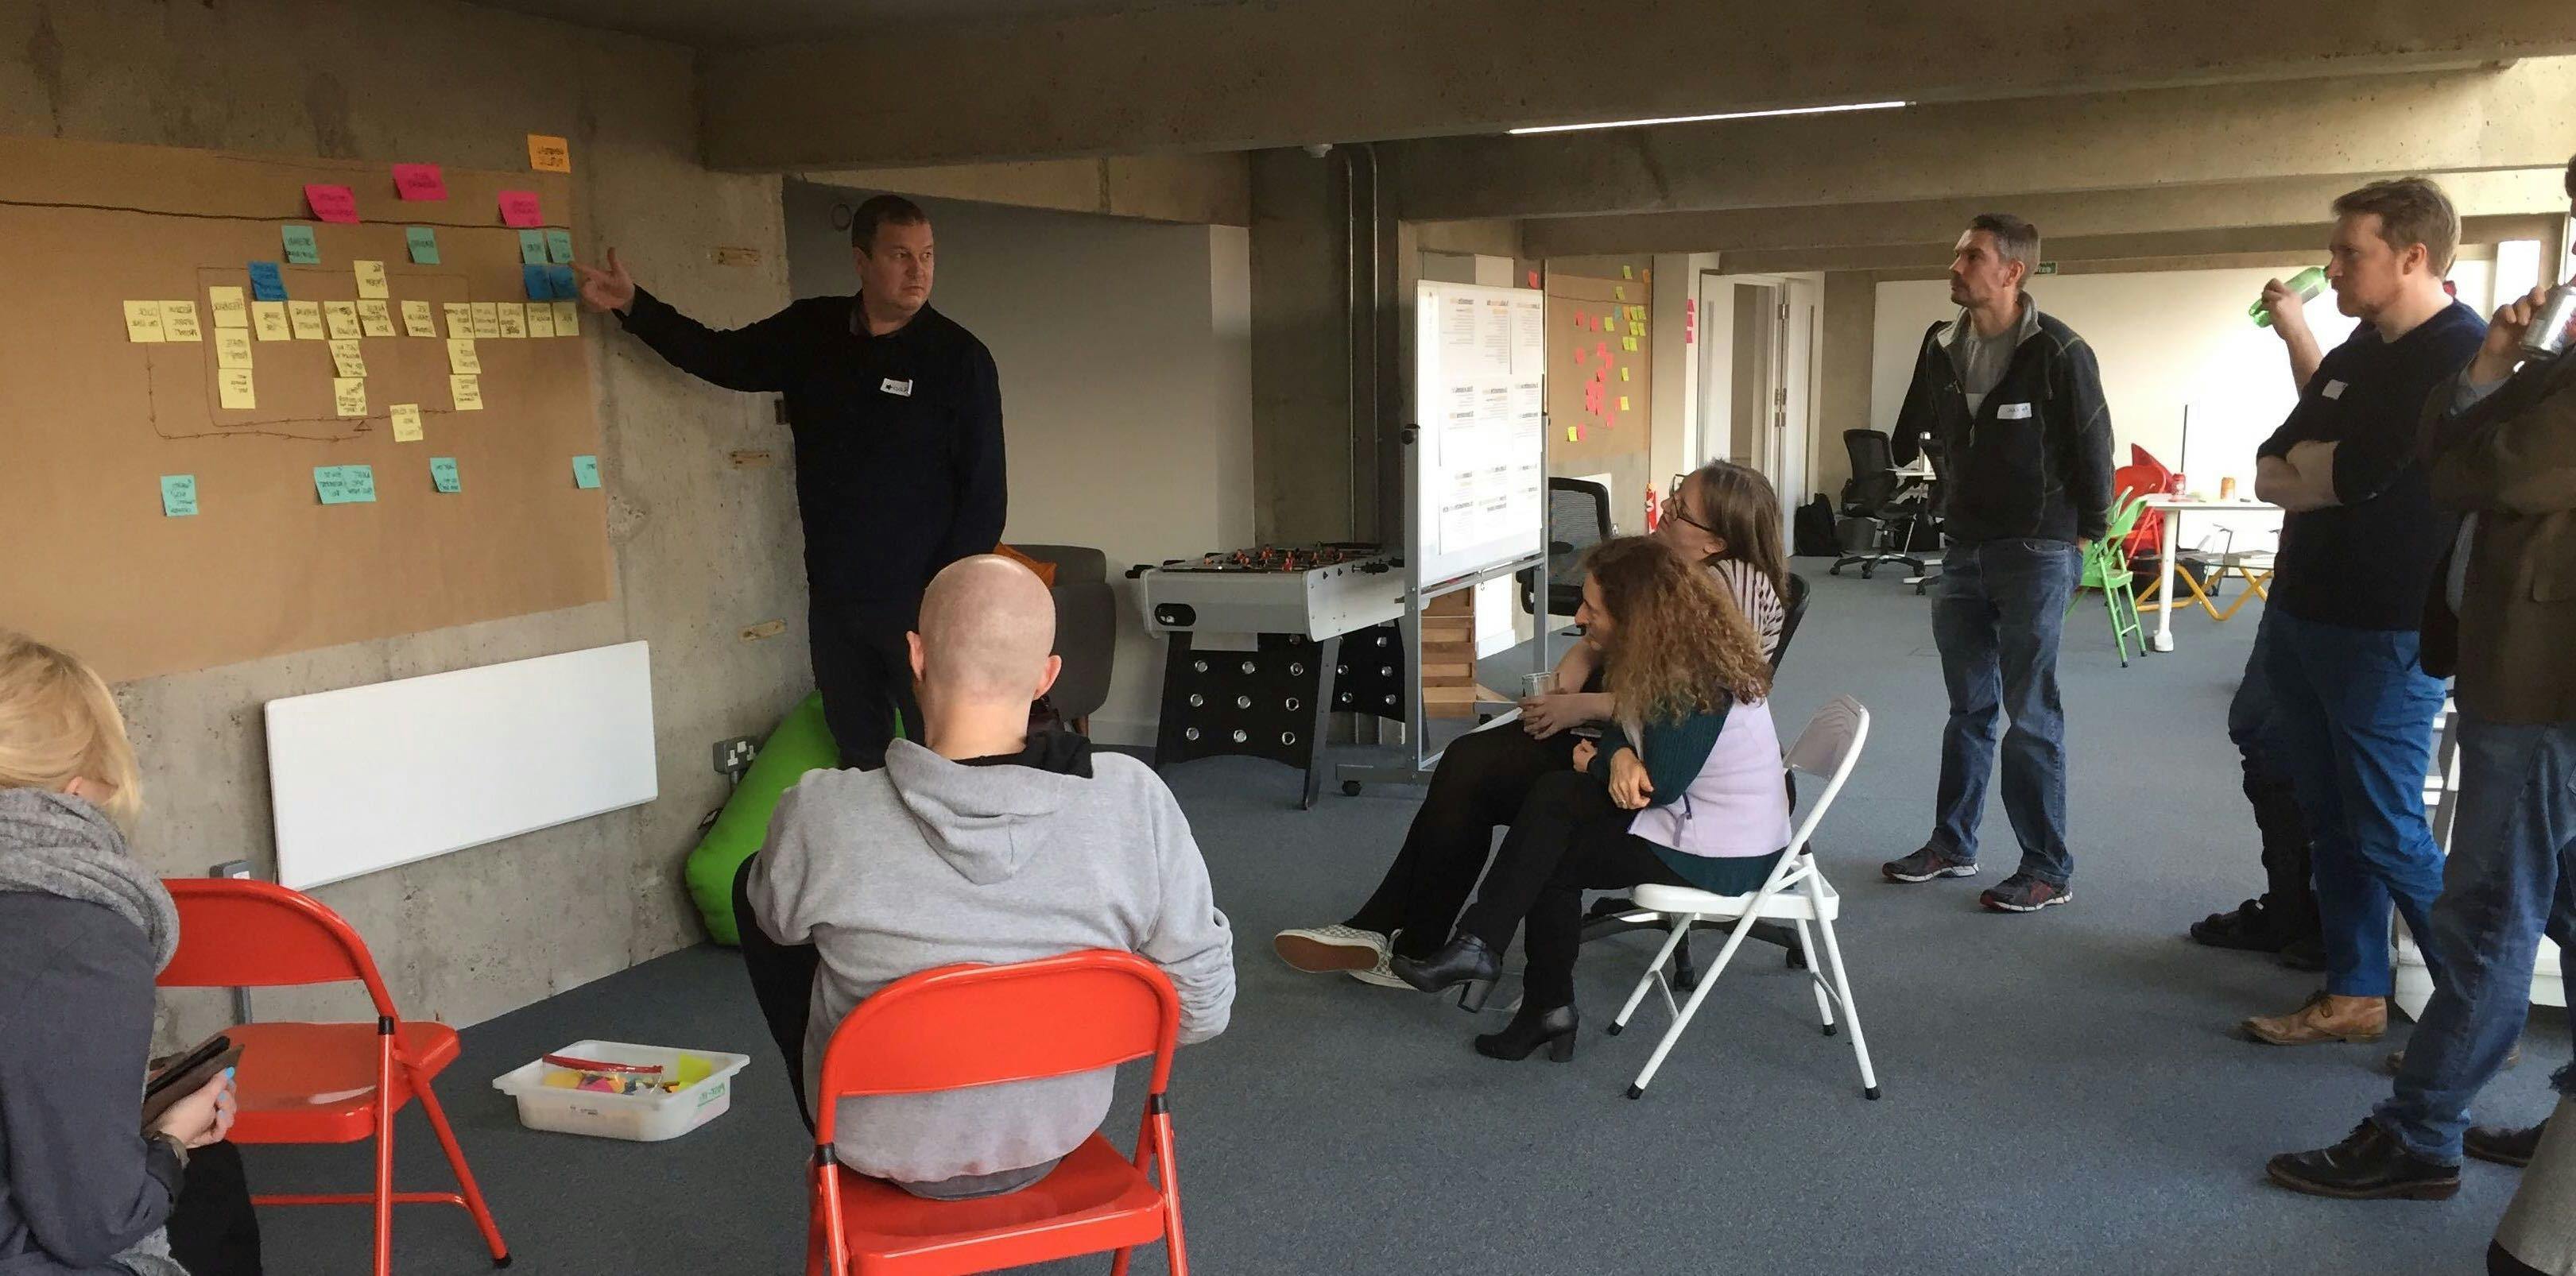 Image showing a collaborative workshop session